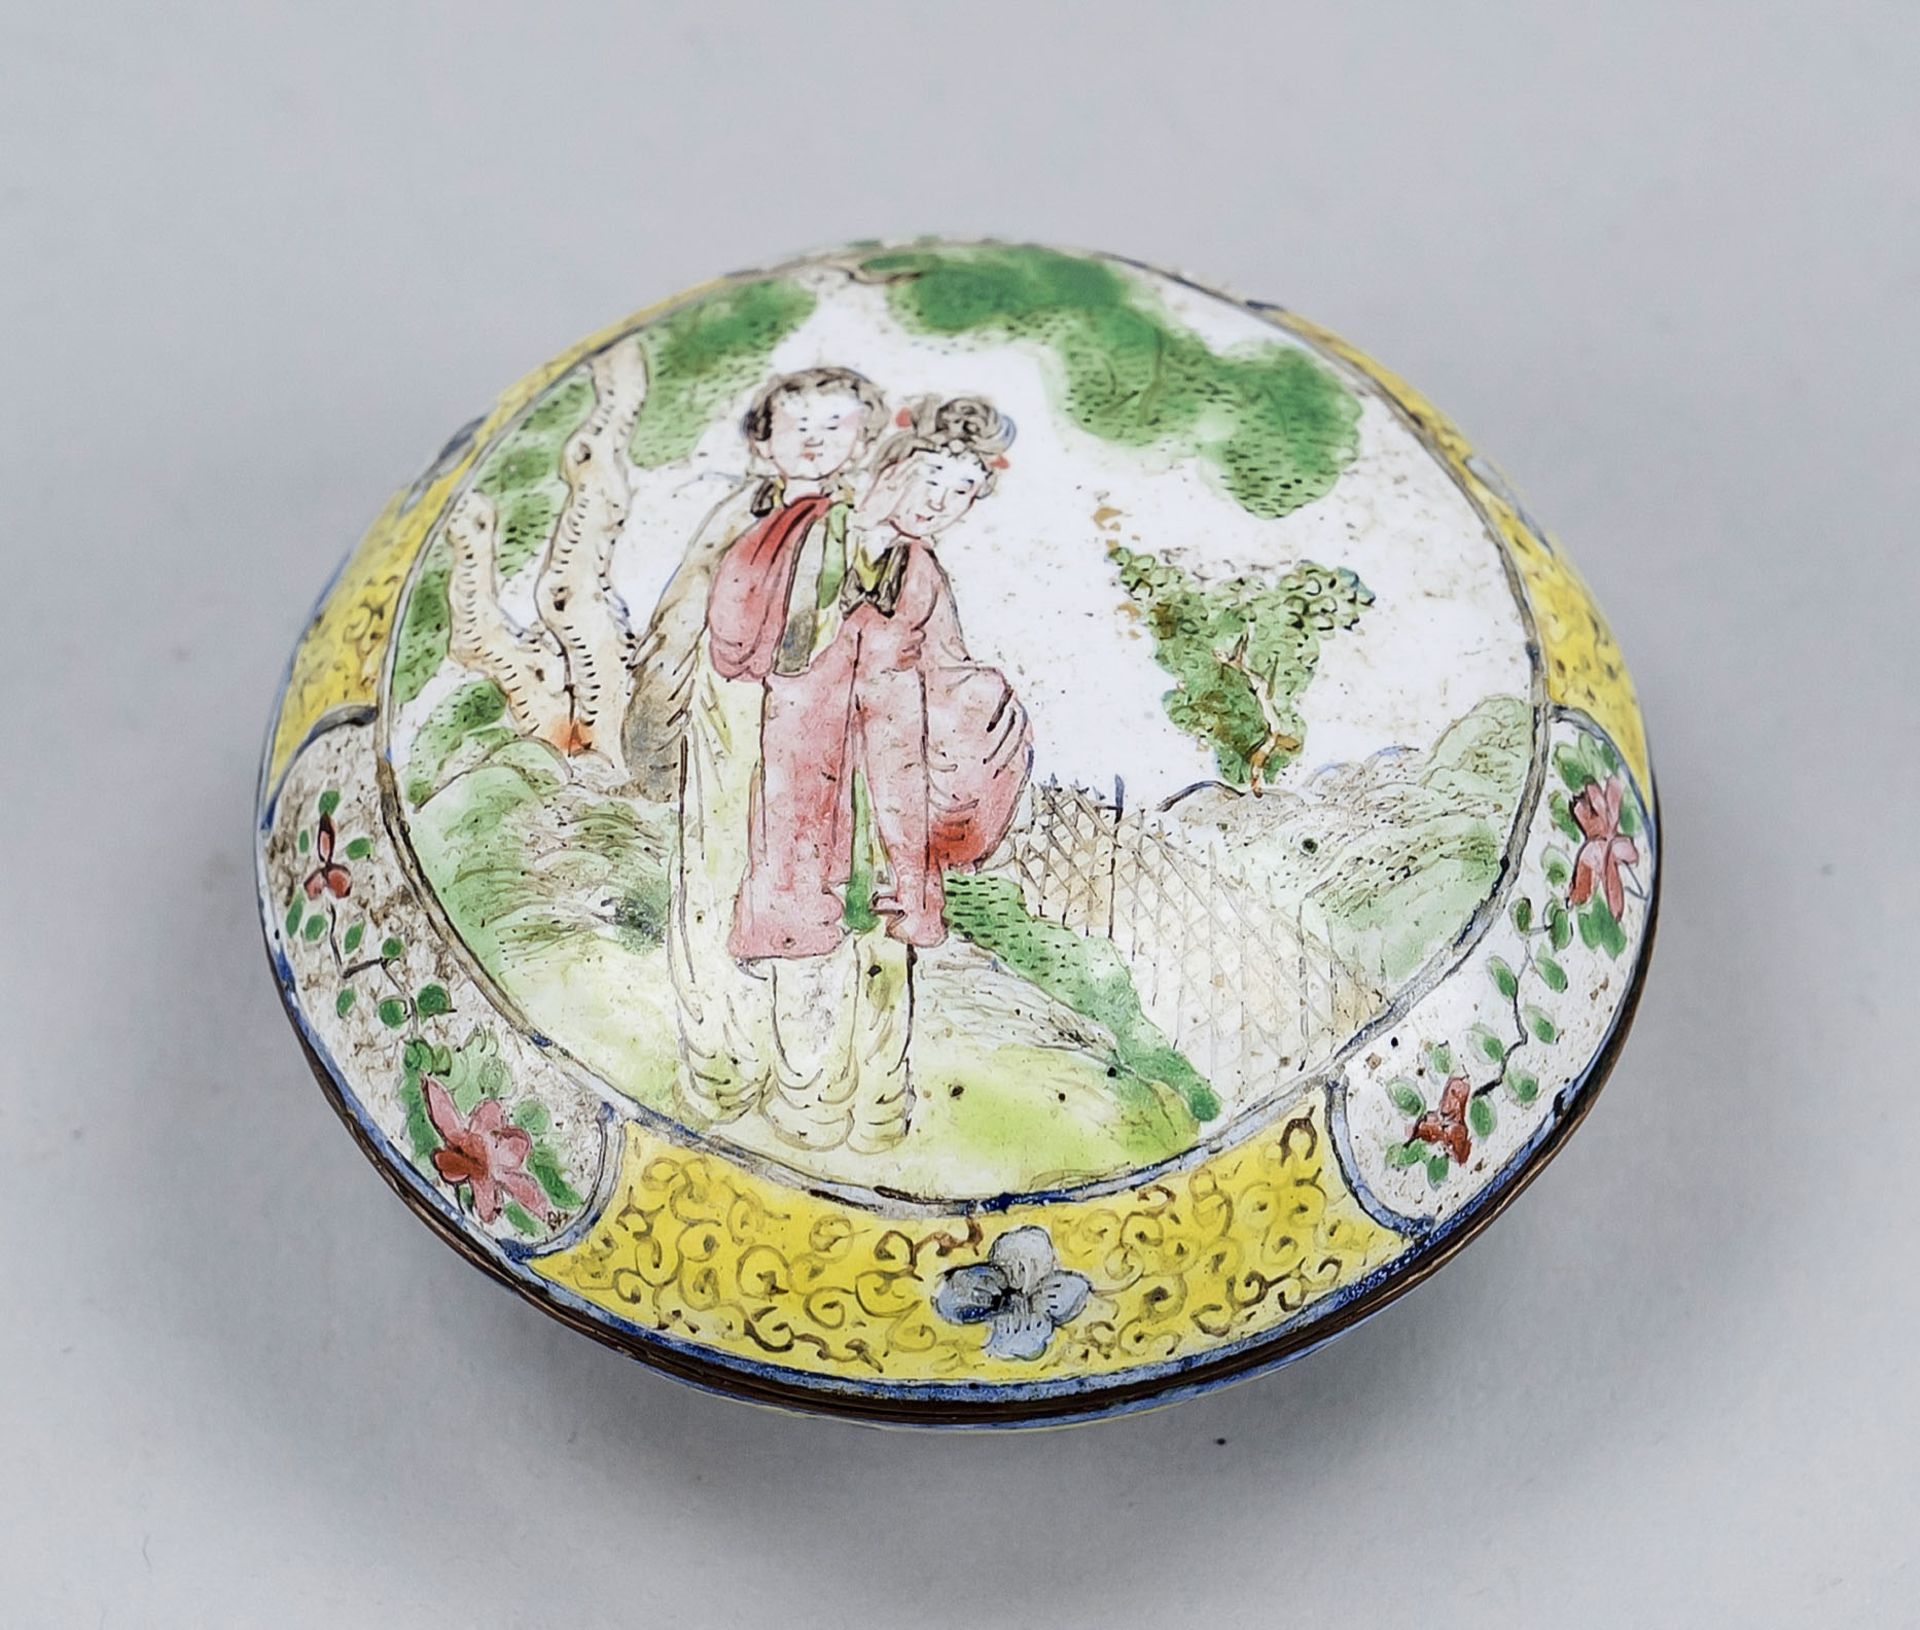 Small enamel lidded box, China (Canton) 18th century, polychrome decoration, under the base a 4-